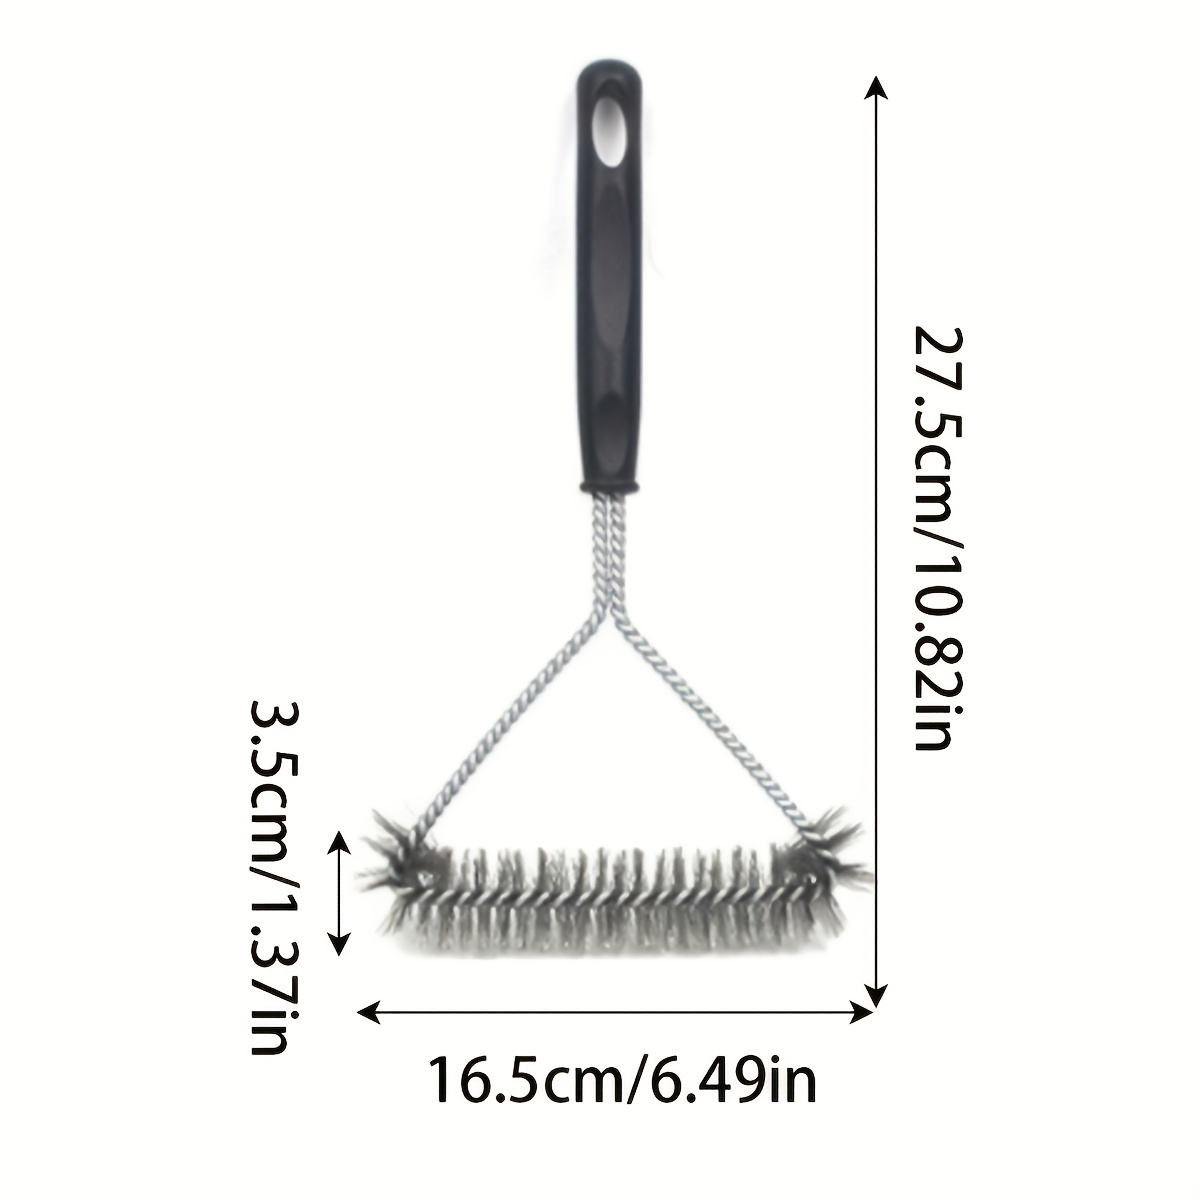 Bbq Grill Cleaning Brush, Gas Stove Cleaning Brush, Heavy Duty